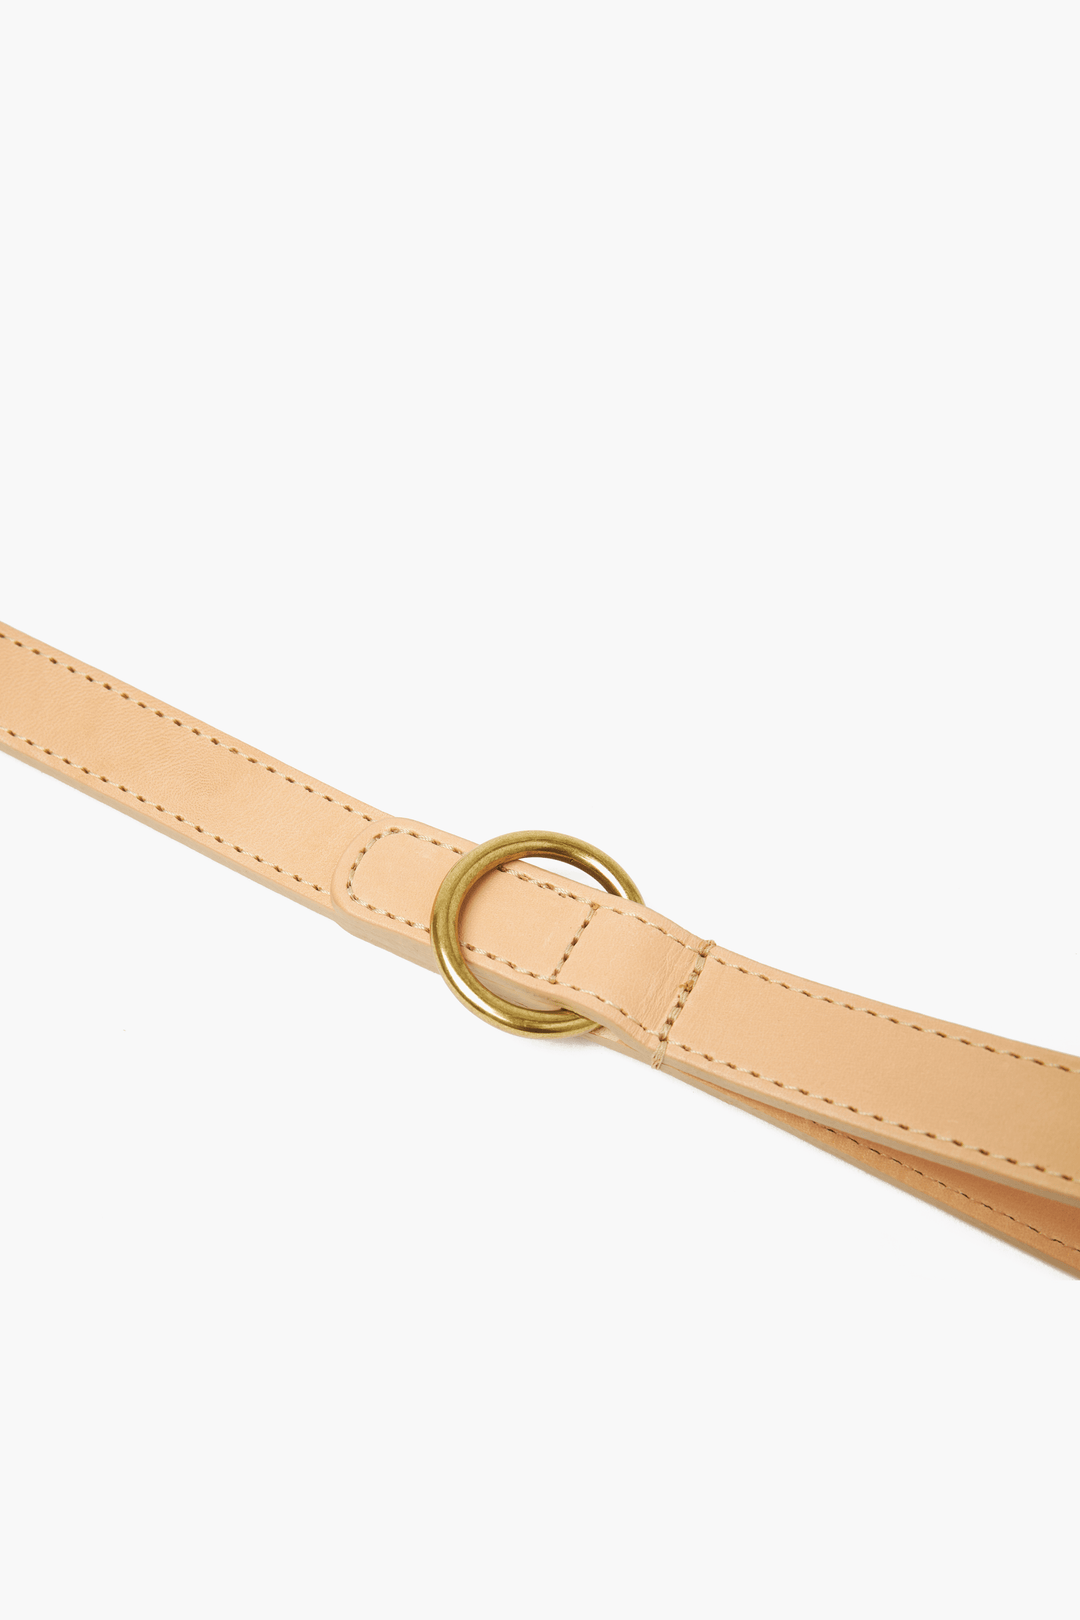 Hand-Stitched Premium Leather Dog Lead in Natural with Brass Hardware